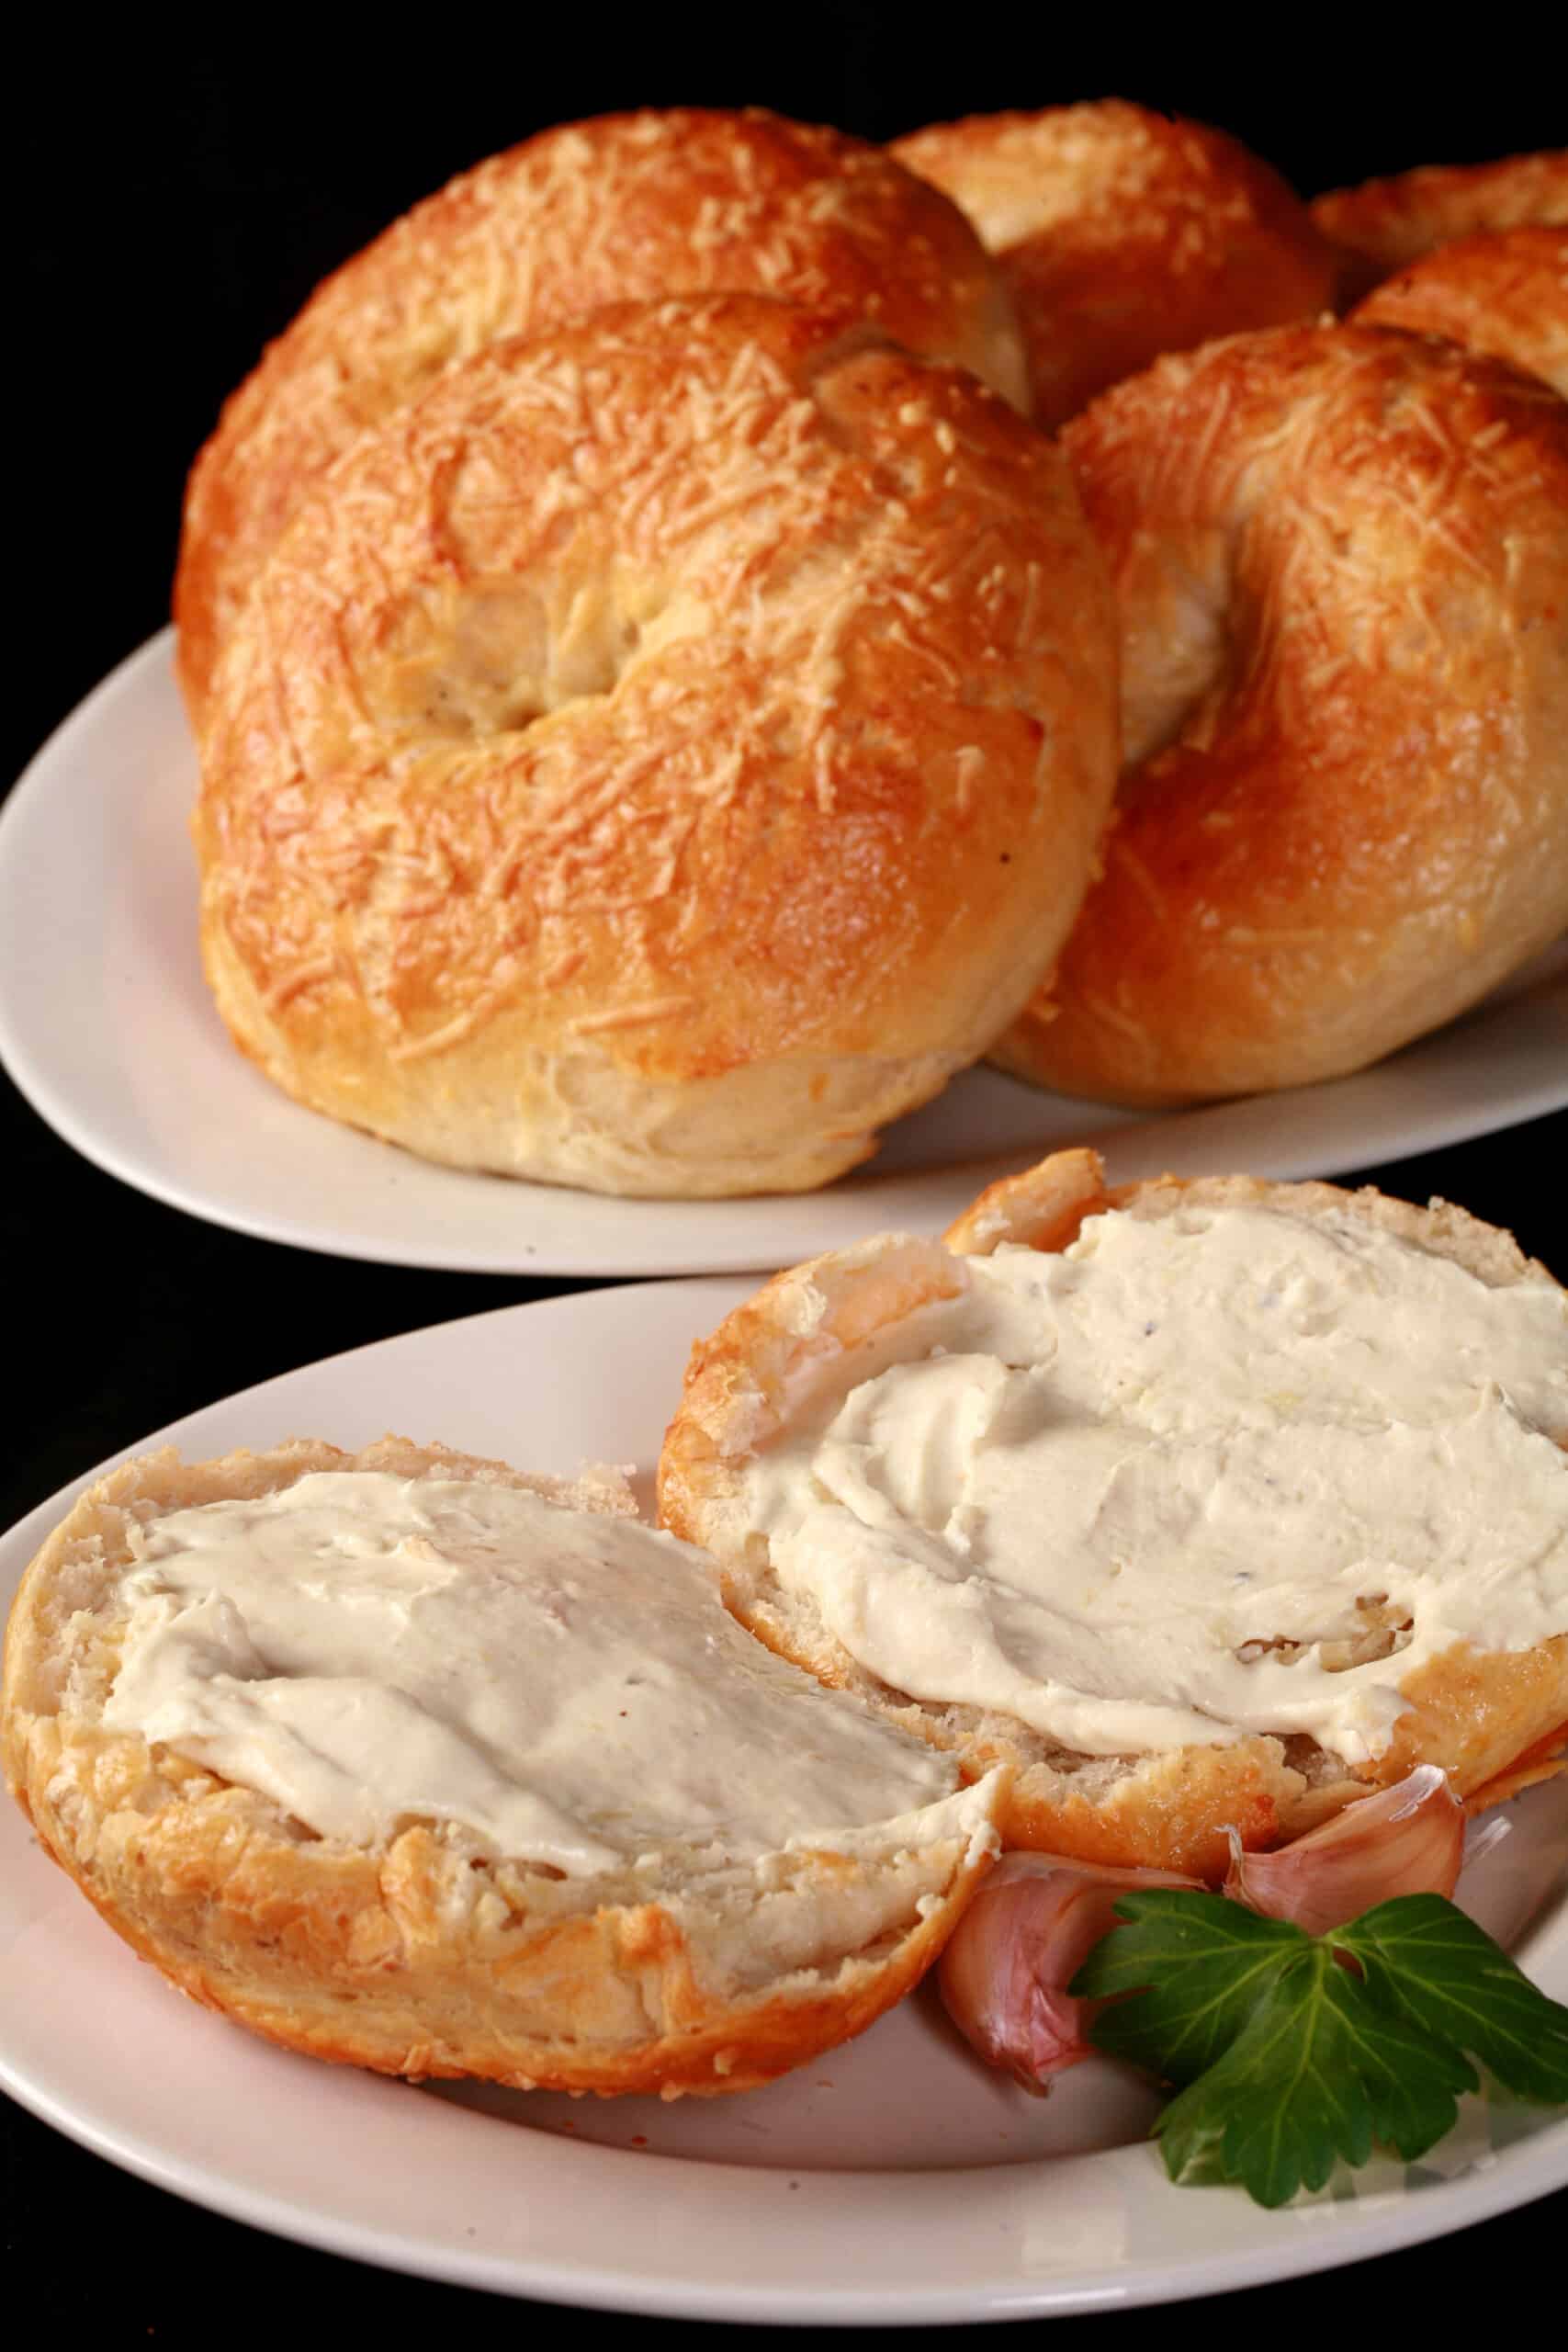 A split open roasted garlic asiago cheese bagel with cream cheese on it in front of a plate of asiago bagels.